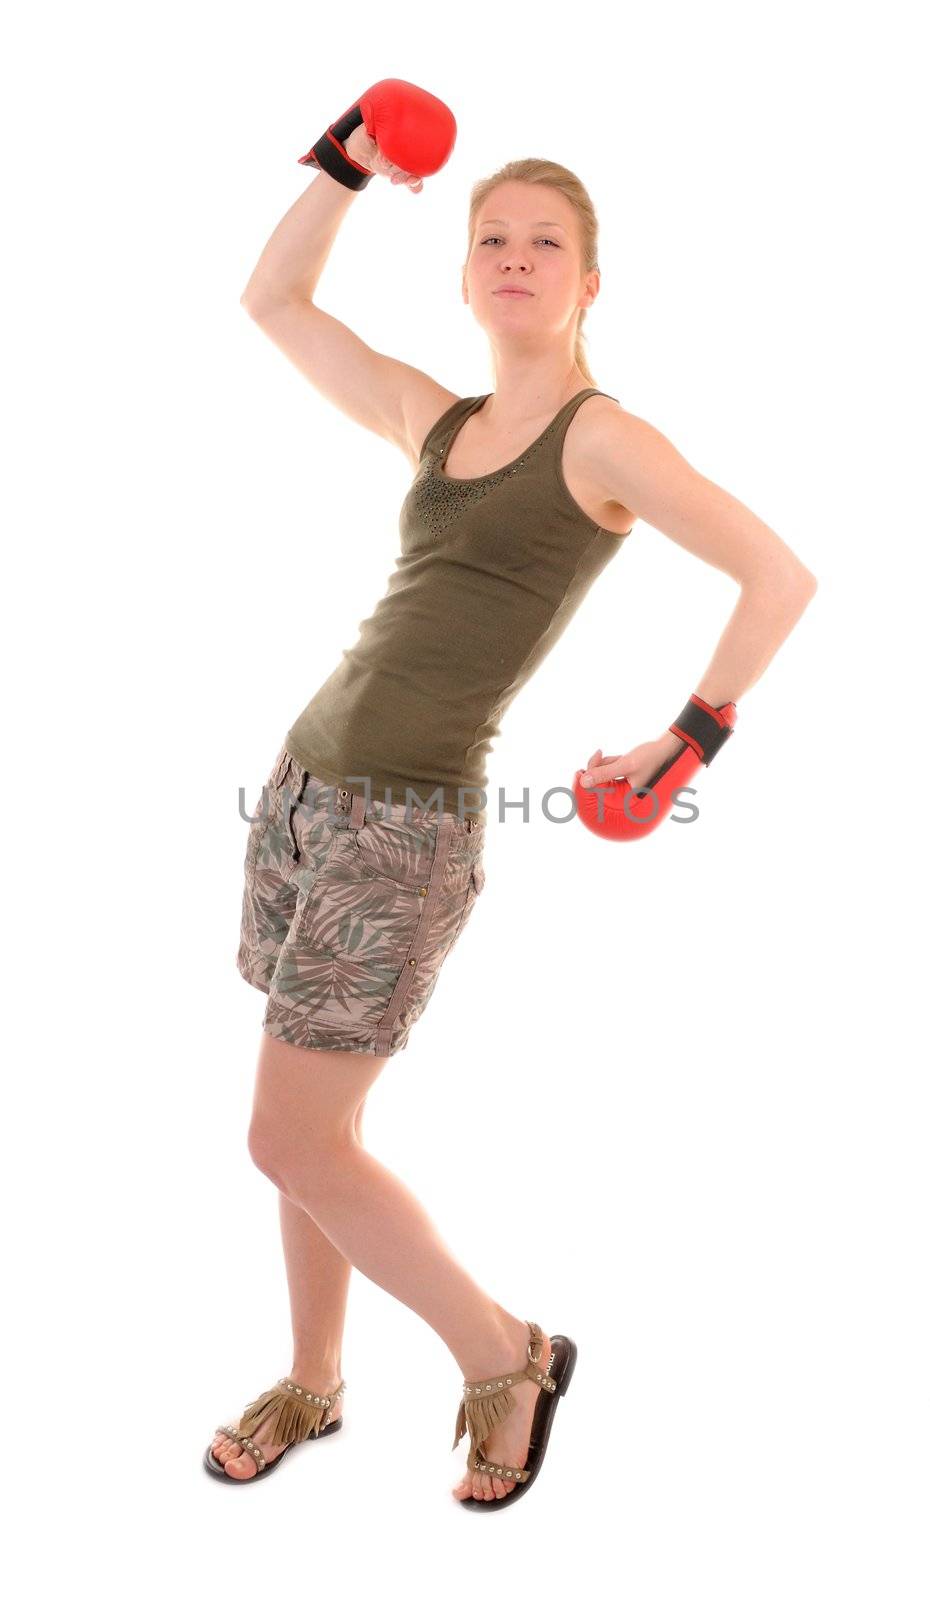 Fun girl with red boxing gloves